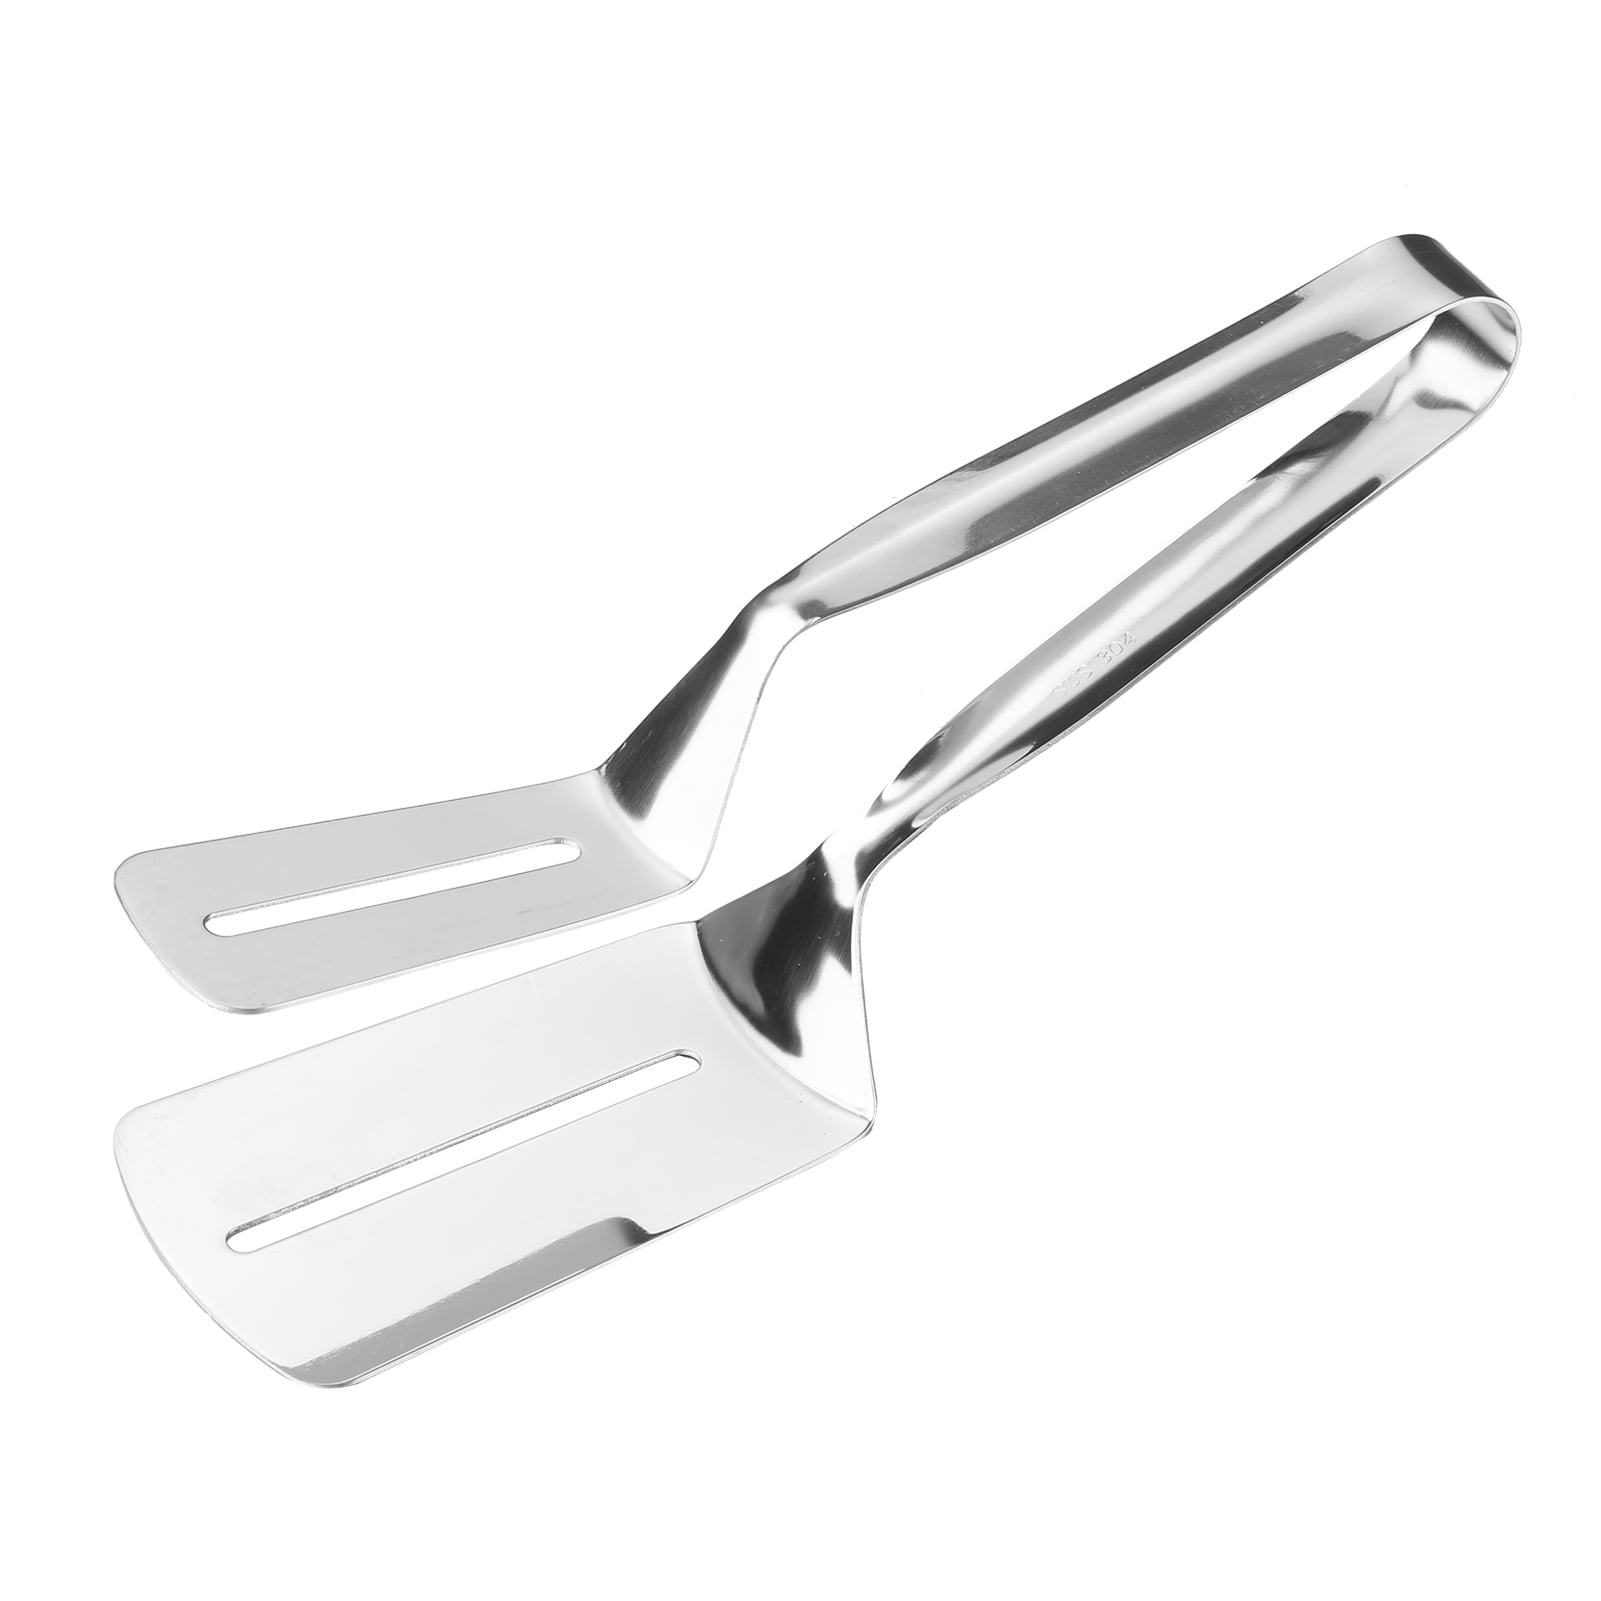 Stainless Steel Barbecue BBQ Tong Meat Bread Food Clamp Shovel Spatula Kitchen 